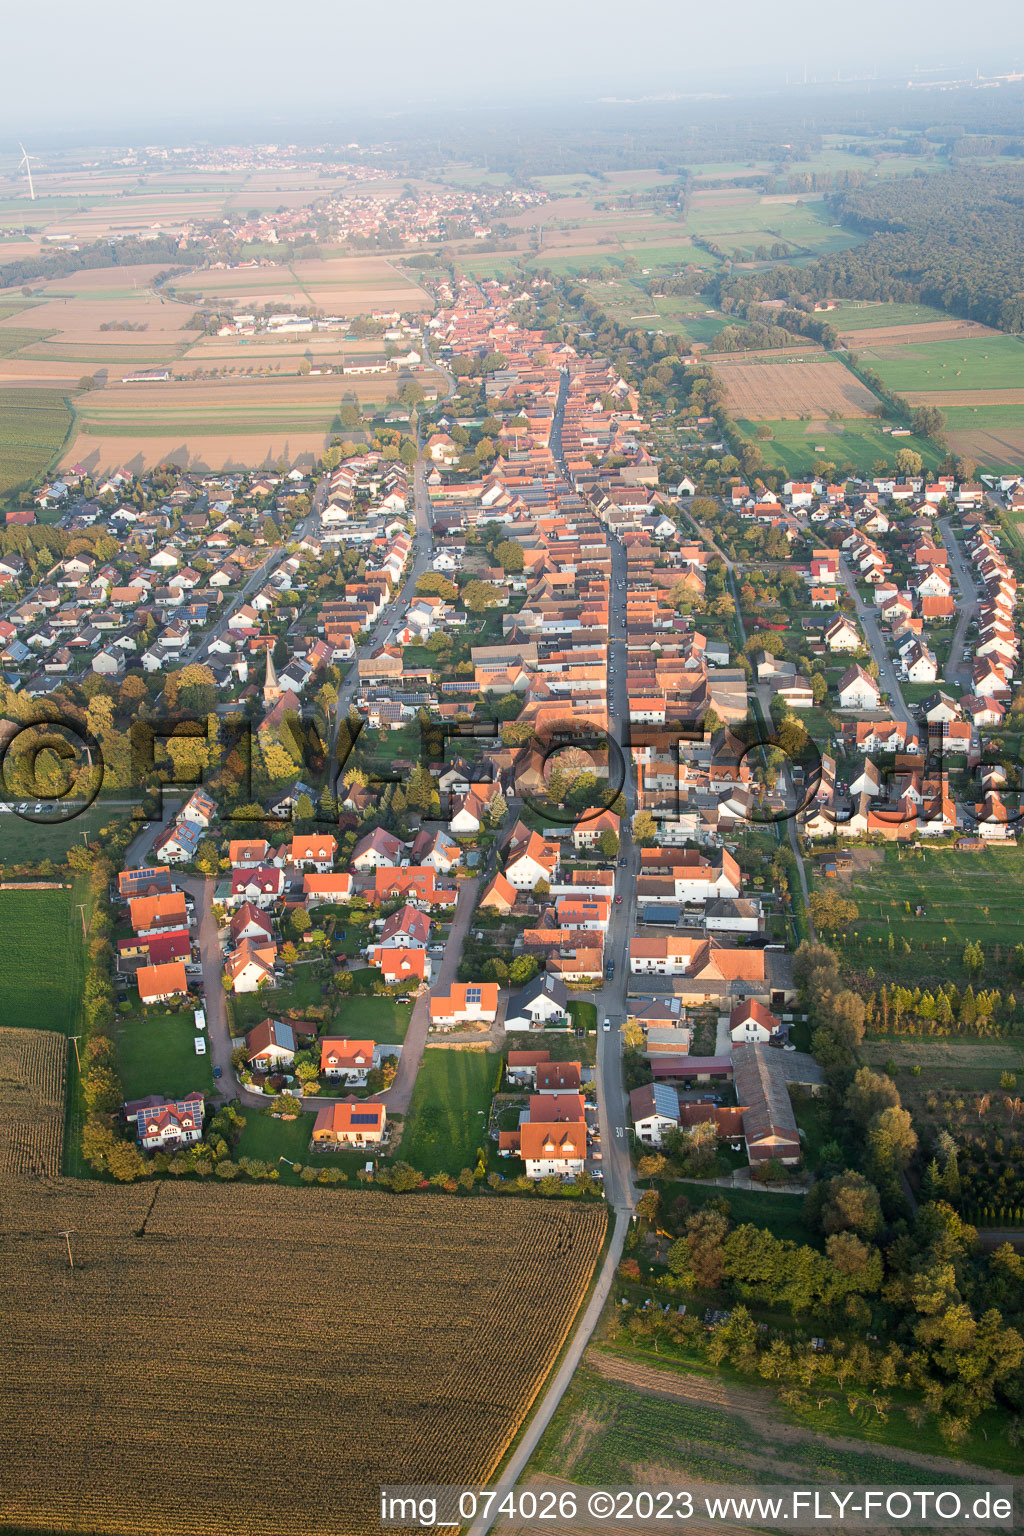 Freckenfeld in the state Rhineland-Palatinate, Germany seen from above